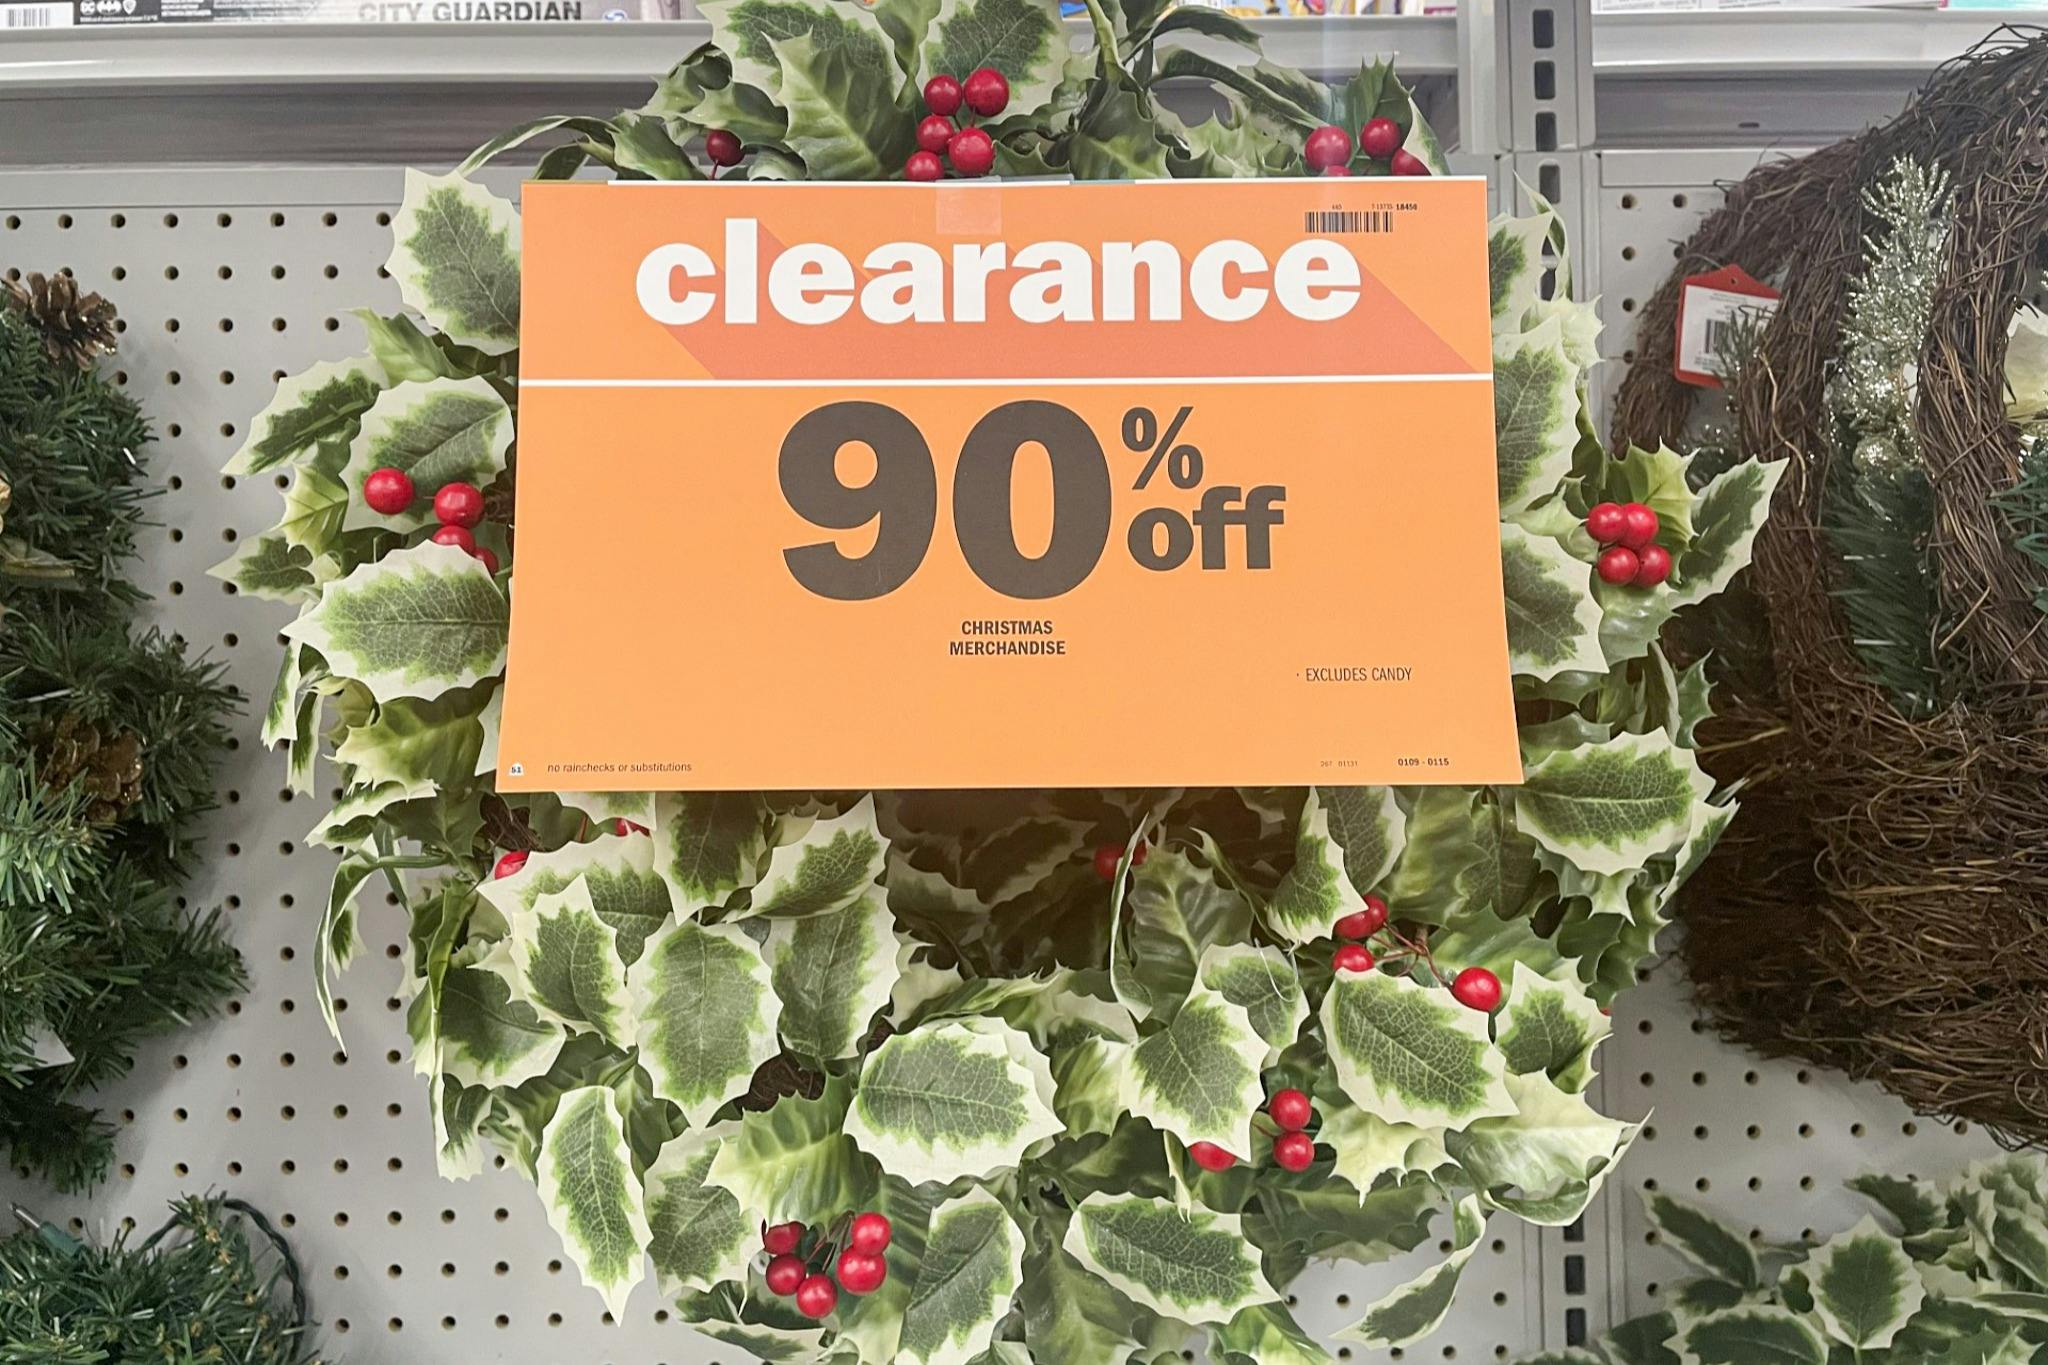  Christmas Deals, Today's Deals, Deal of The Day Prime Today, Deals Today,  Clearance Deals, Todays Daily Deals Clearance, Gray